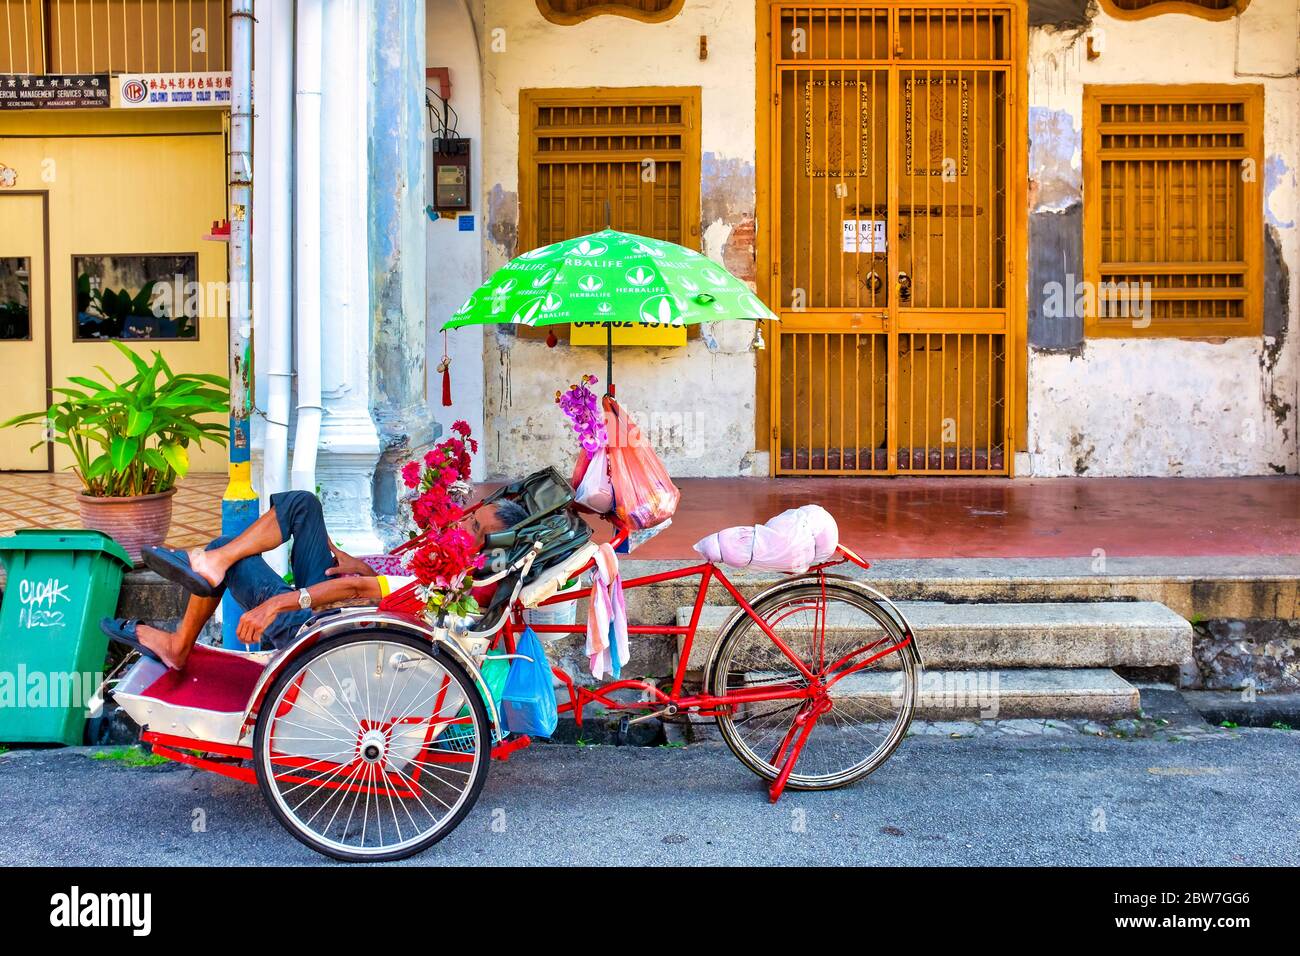 Autista del Cycle Rickshaw che dorme in George Street, George Town, Penang, Malesia Foto Stock